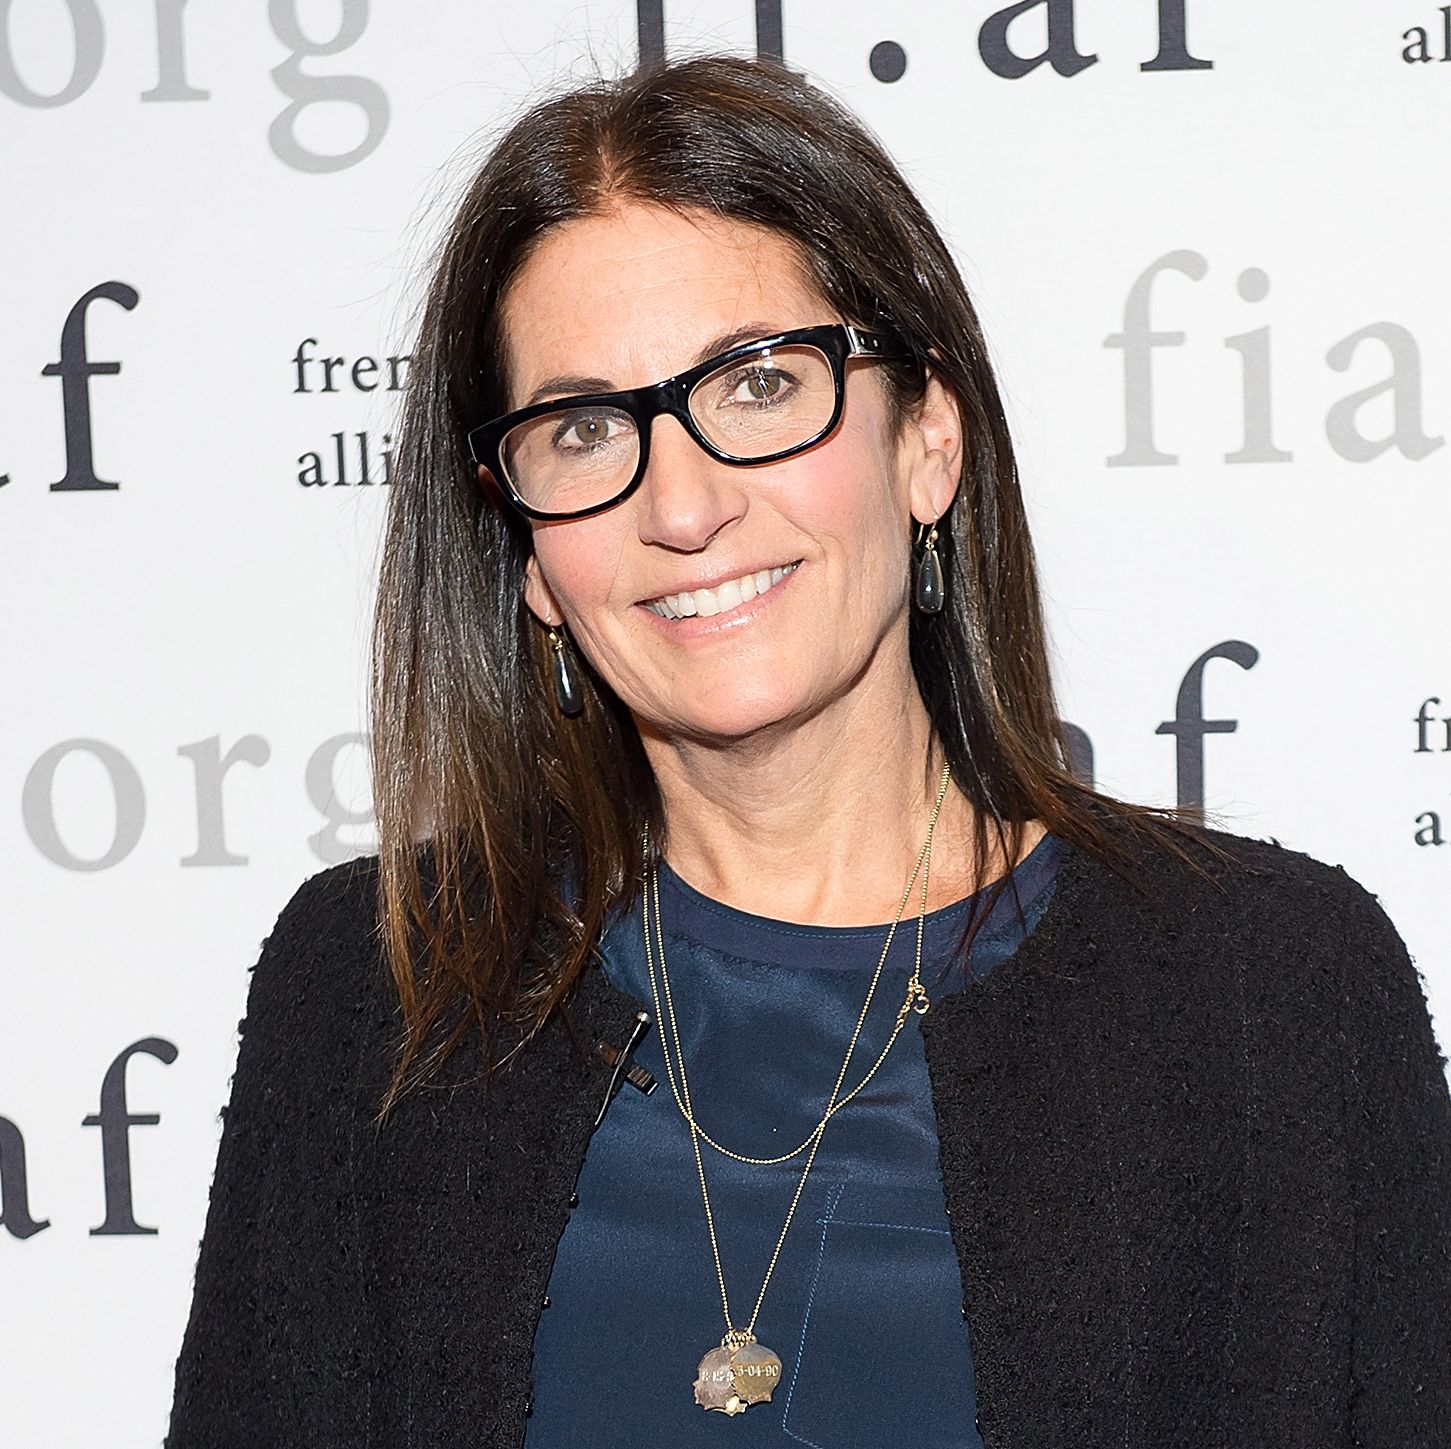 Bobbi Brown Shares Simple Makeup Tips for Rosacea That Make a ‘Big Difference’